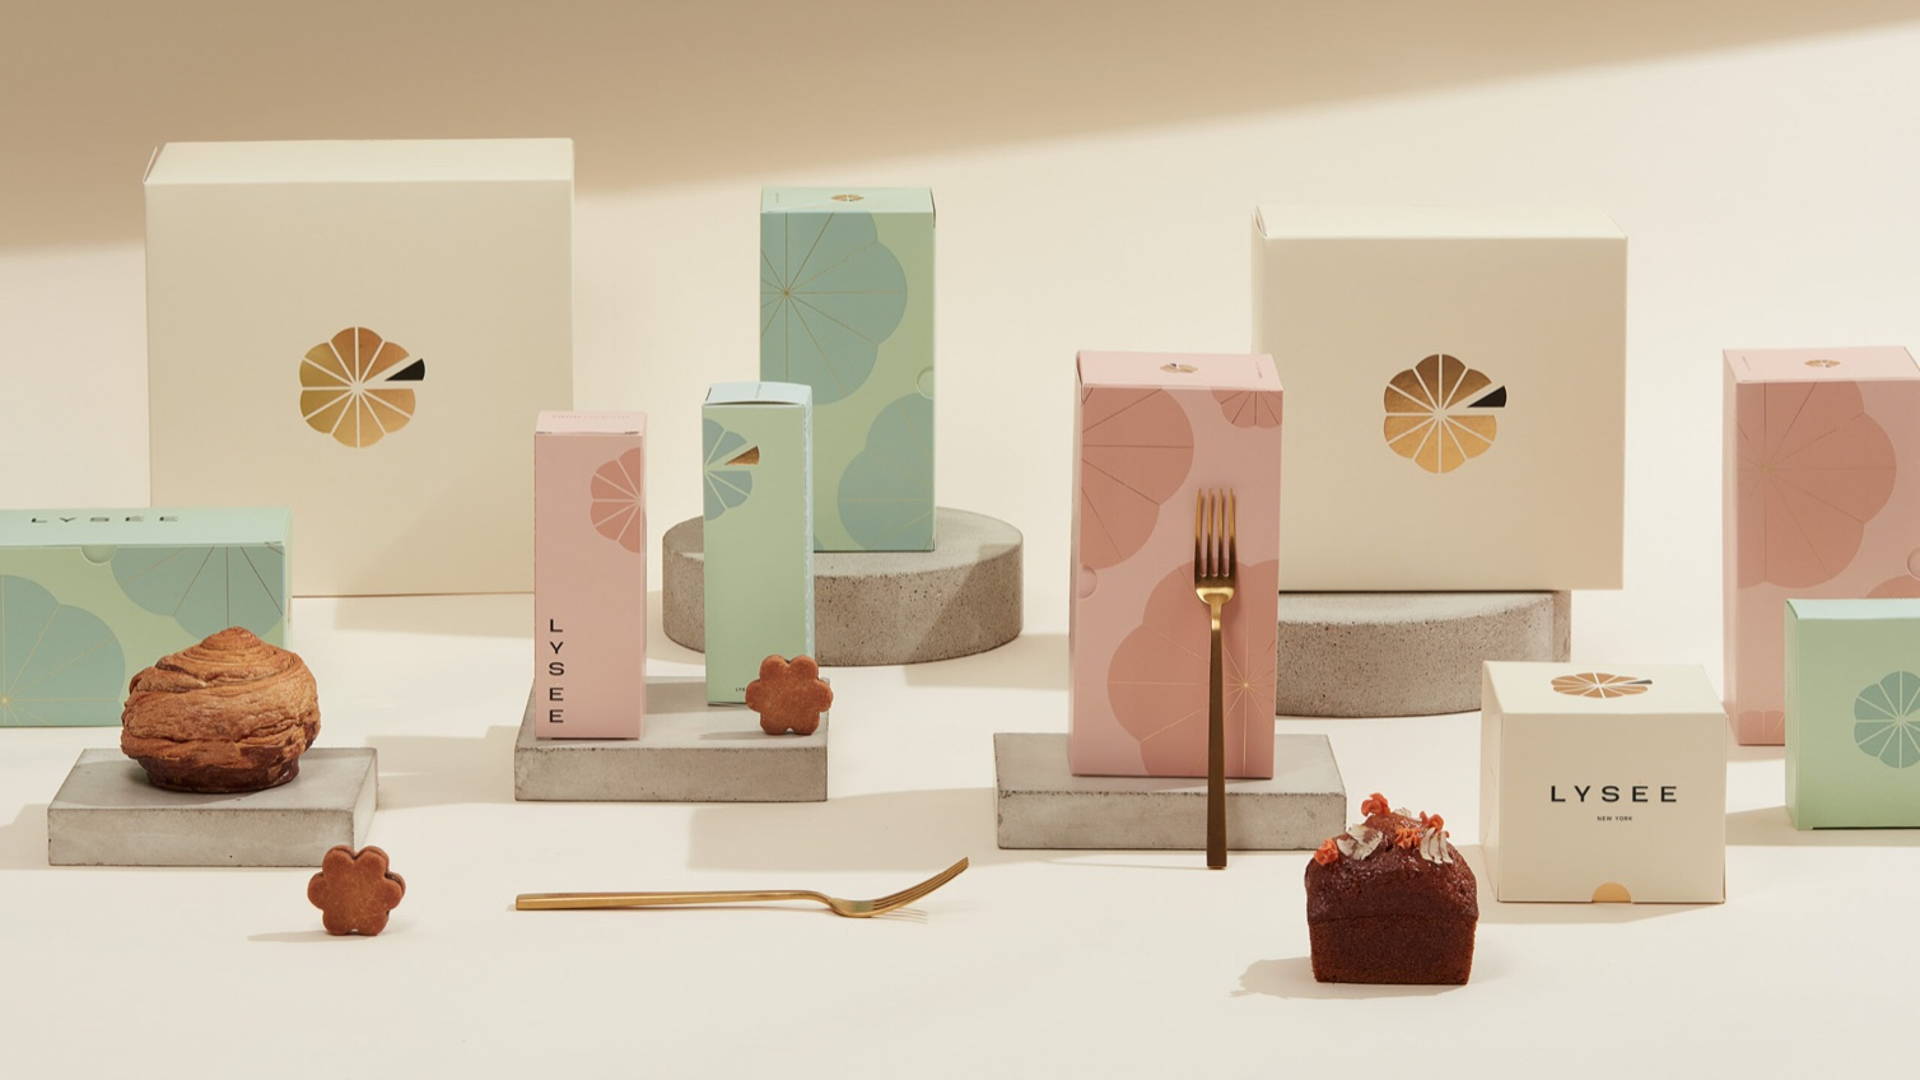 Featured image for LMNOP Creative Bake Up a Deliciously Elegant Packaging System For Chef Eunji Lee’s Lysee